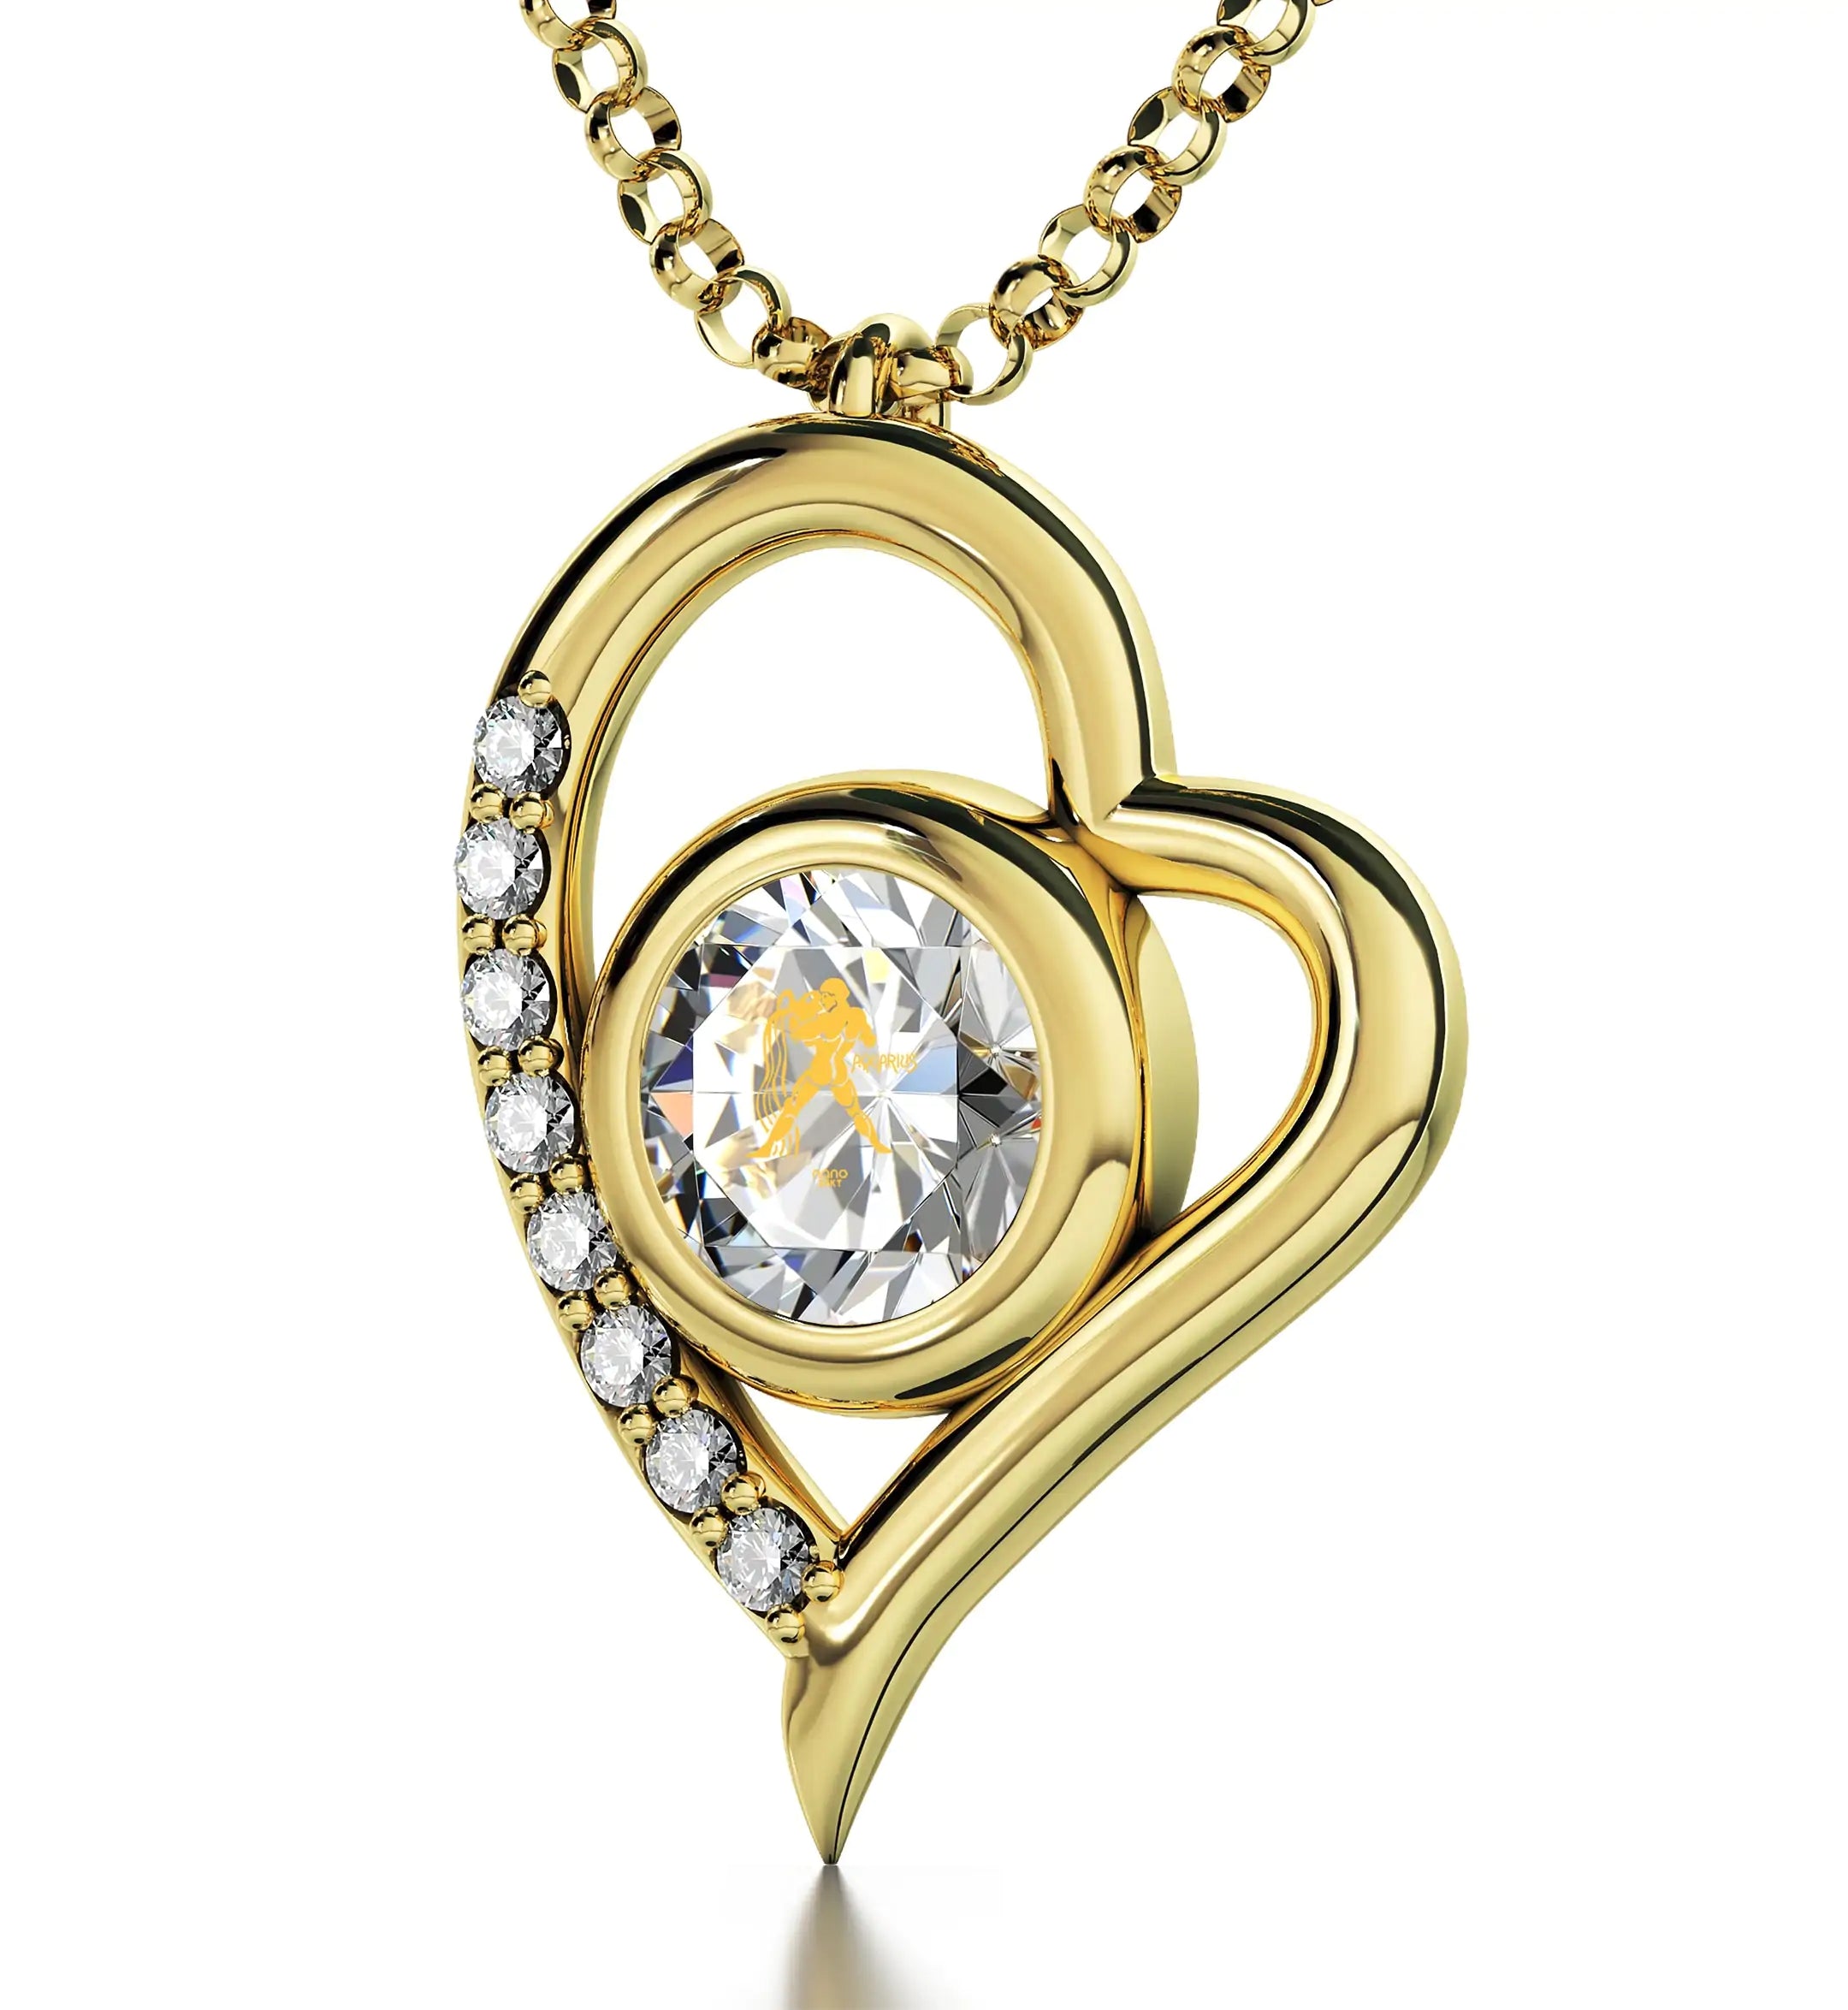 Gold Plated Silver Zodiac Heart Pendant Aquarius Necklace with a Swarovski crystal featuring the Aquarius zodiac symbol, framed by a circular golden design.